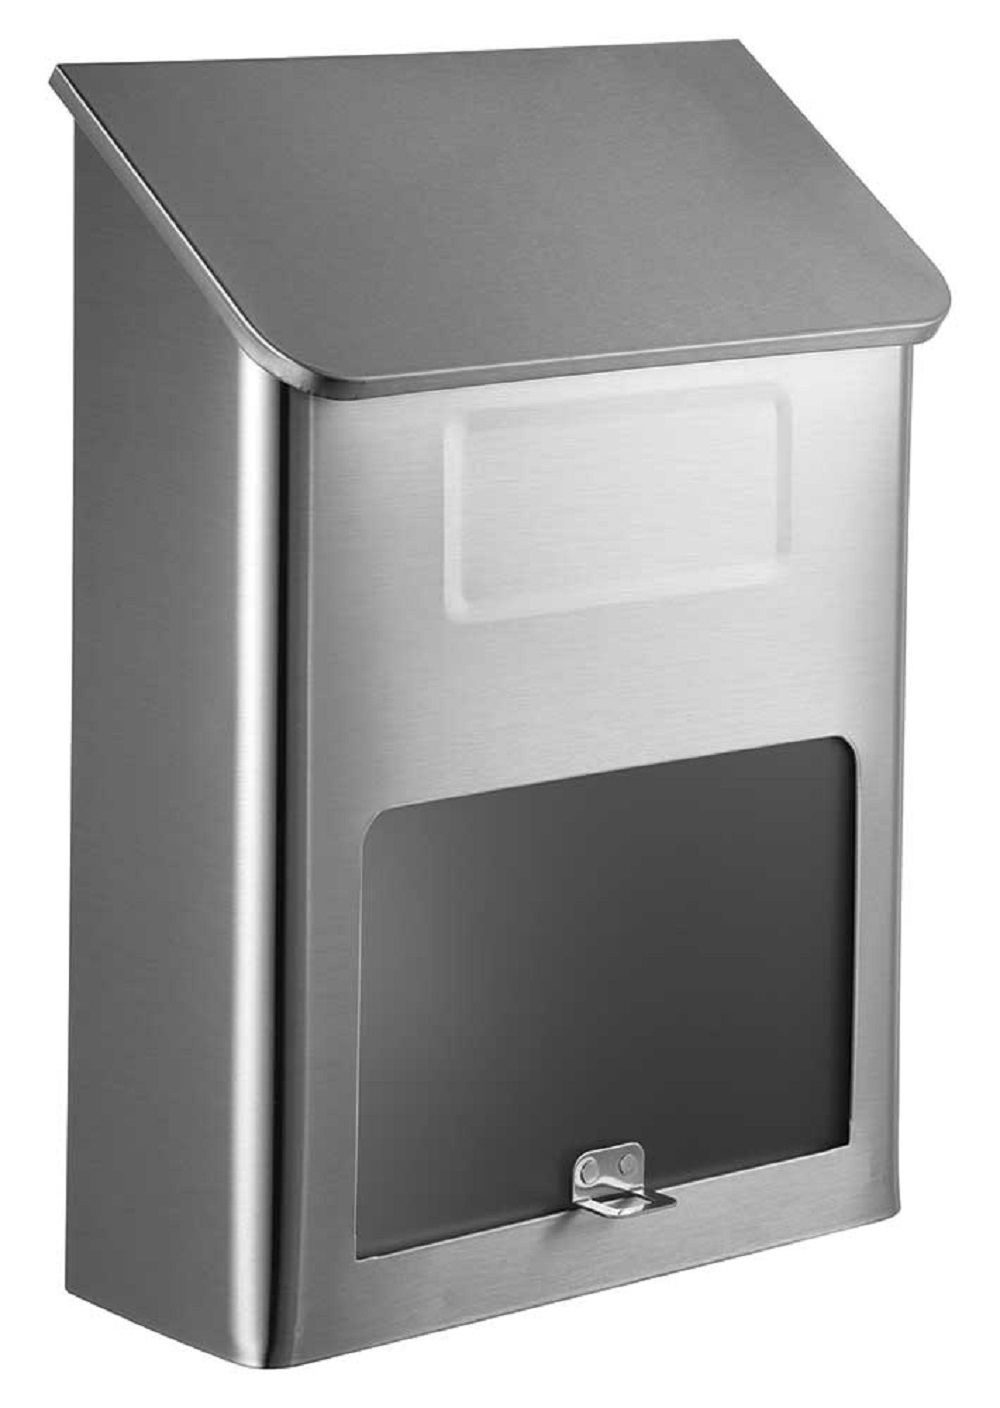 Metros mailbox, stainless steel with window